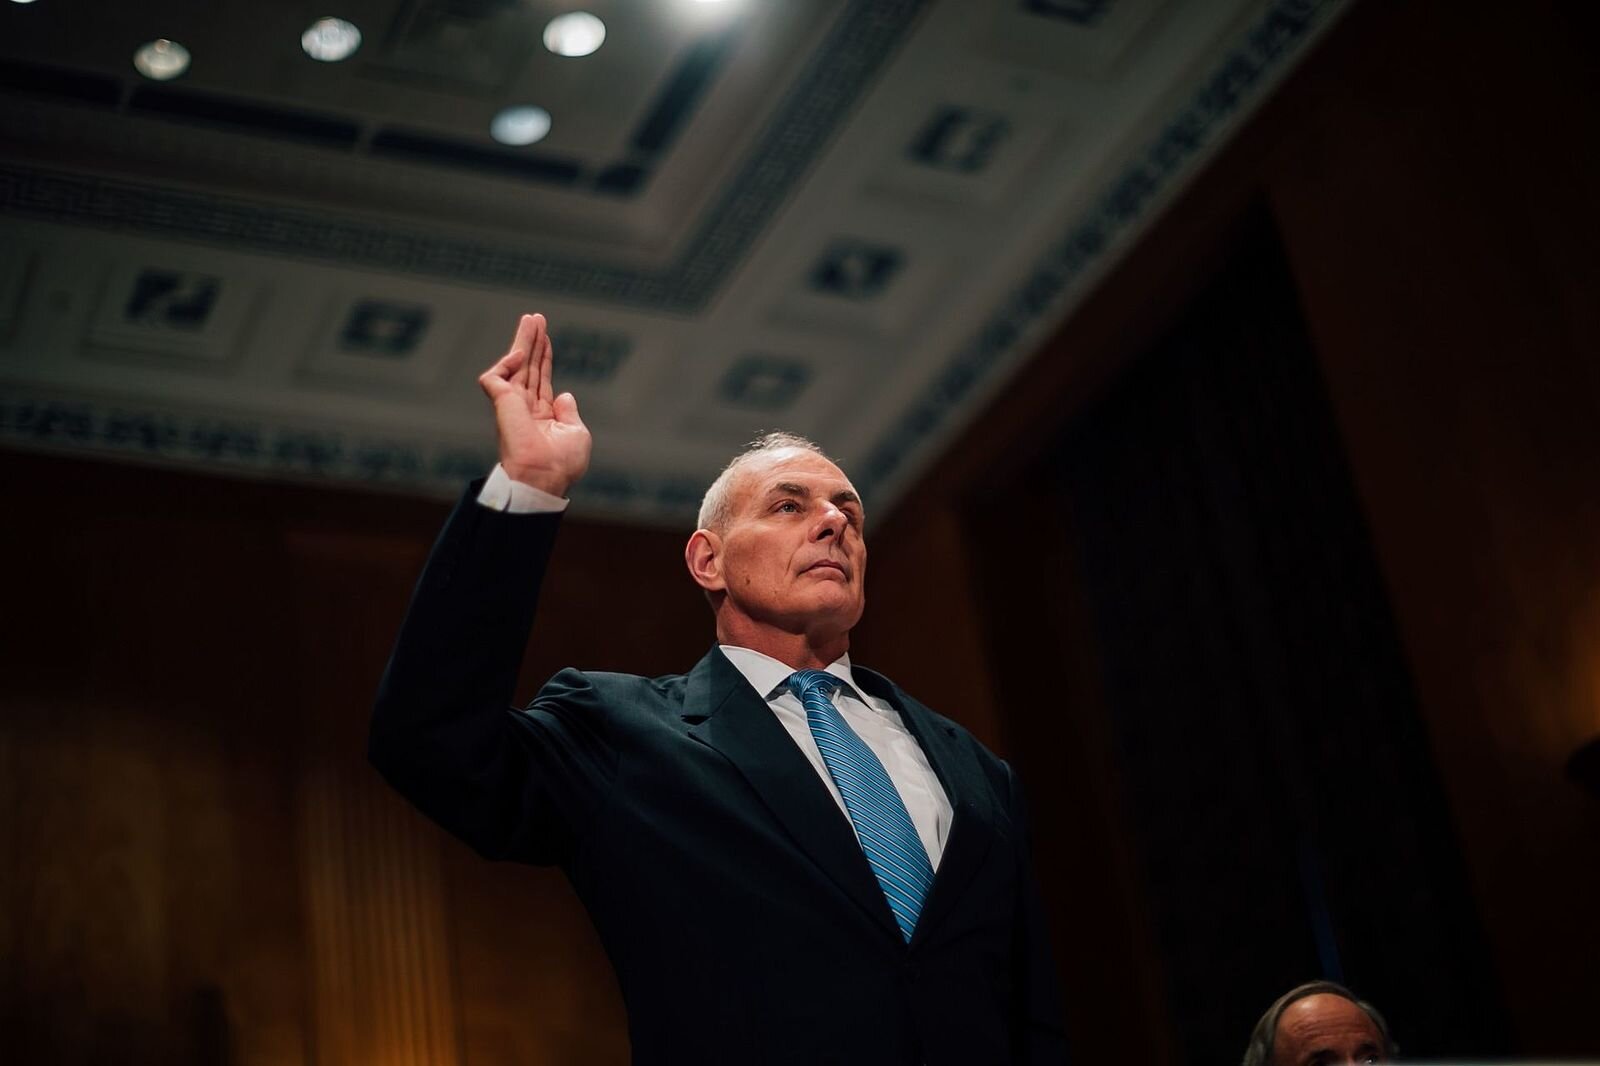 Gen. John Kelly, Donald Trump’s former Chief of Staff, during his confirmation hearing for Secretary of Homeland Security,